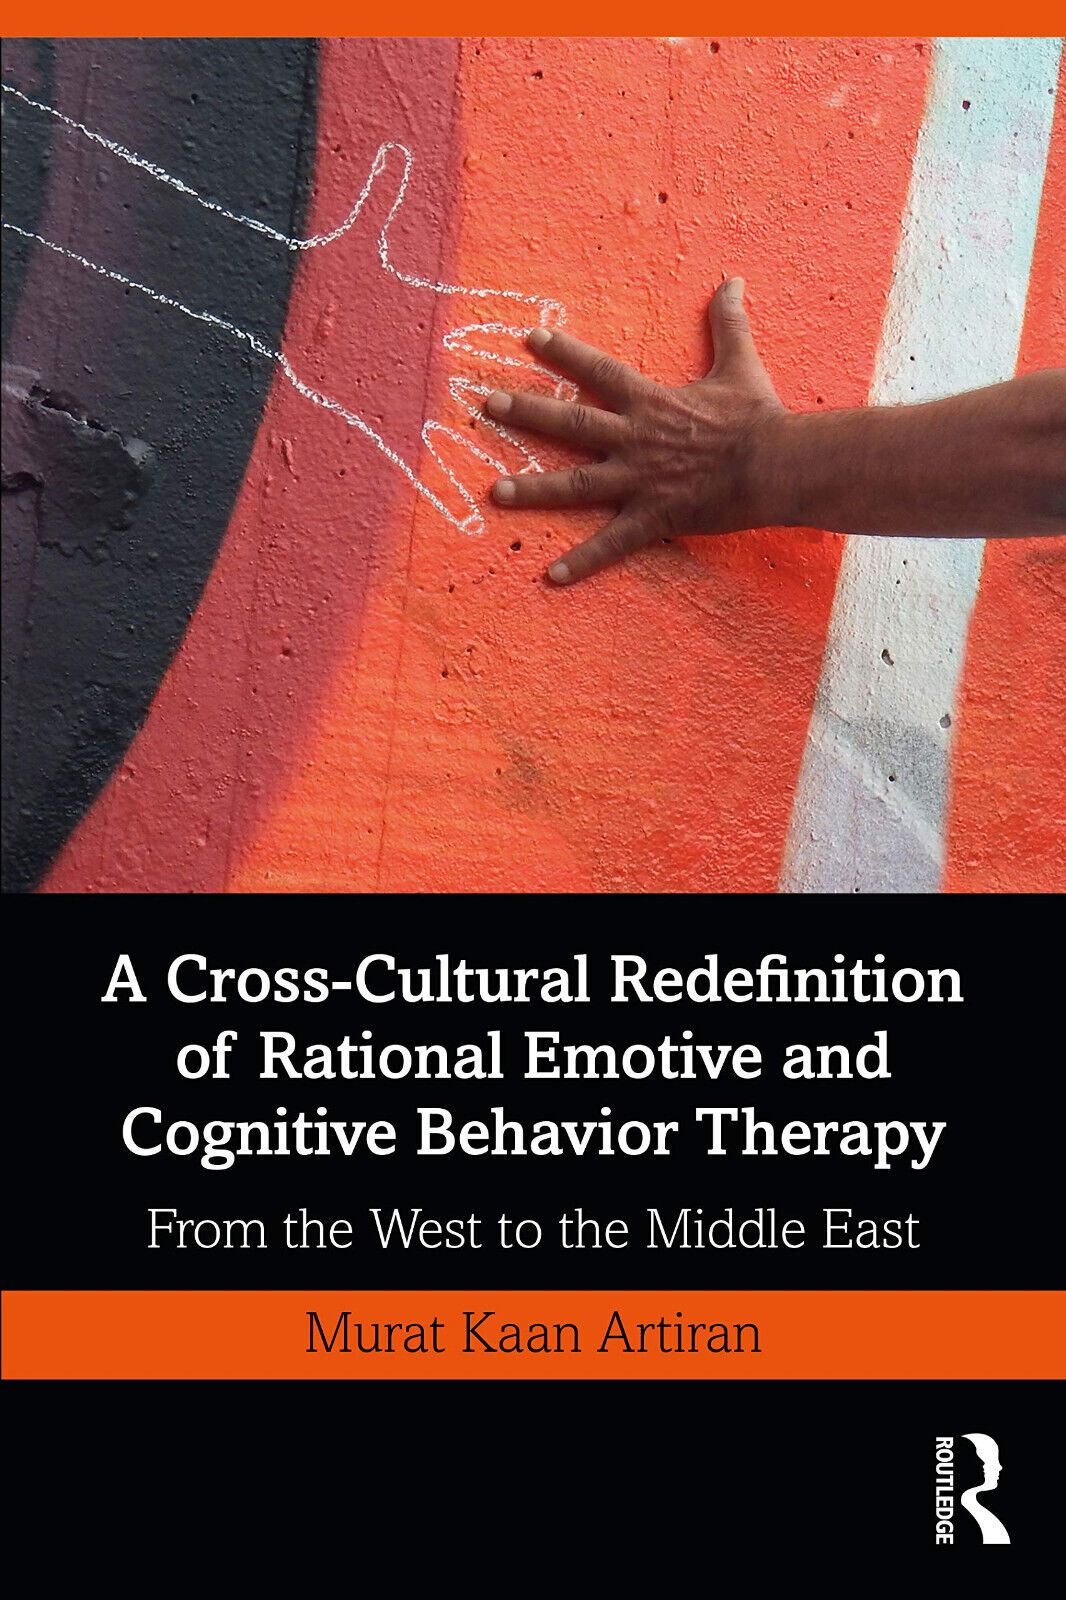 A Cross-Cultural Redefinition of Rational Emotive and Cognitive Behavior Therapy libro usato